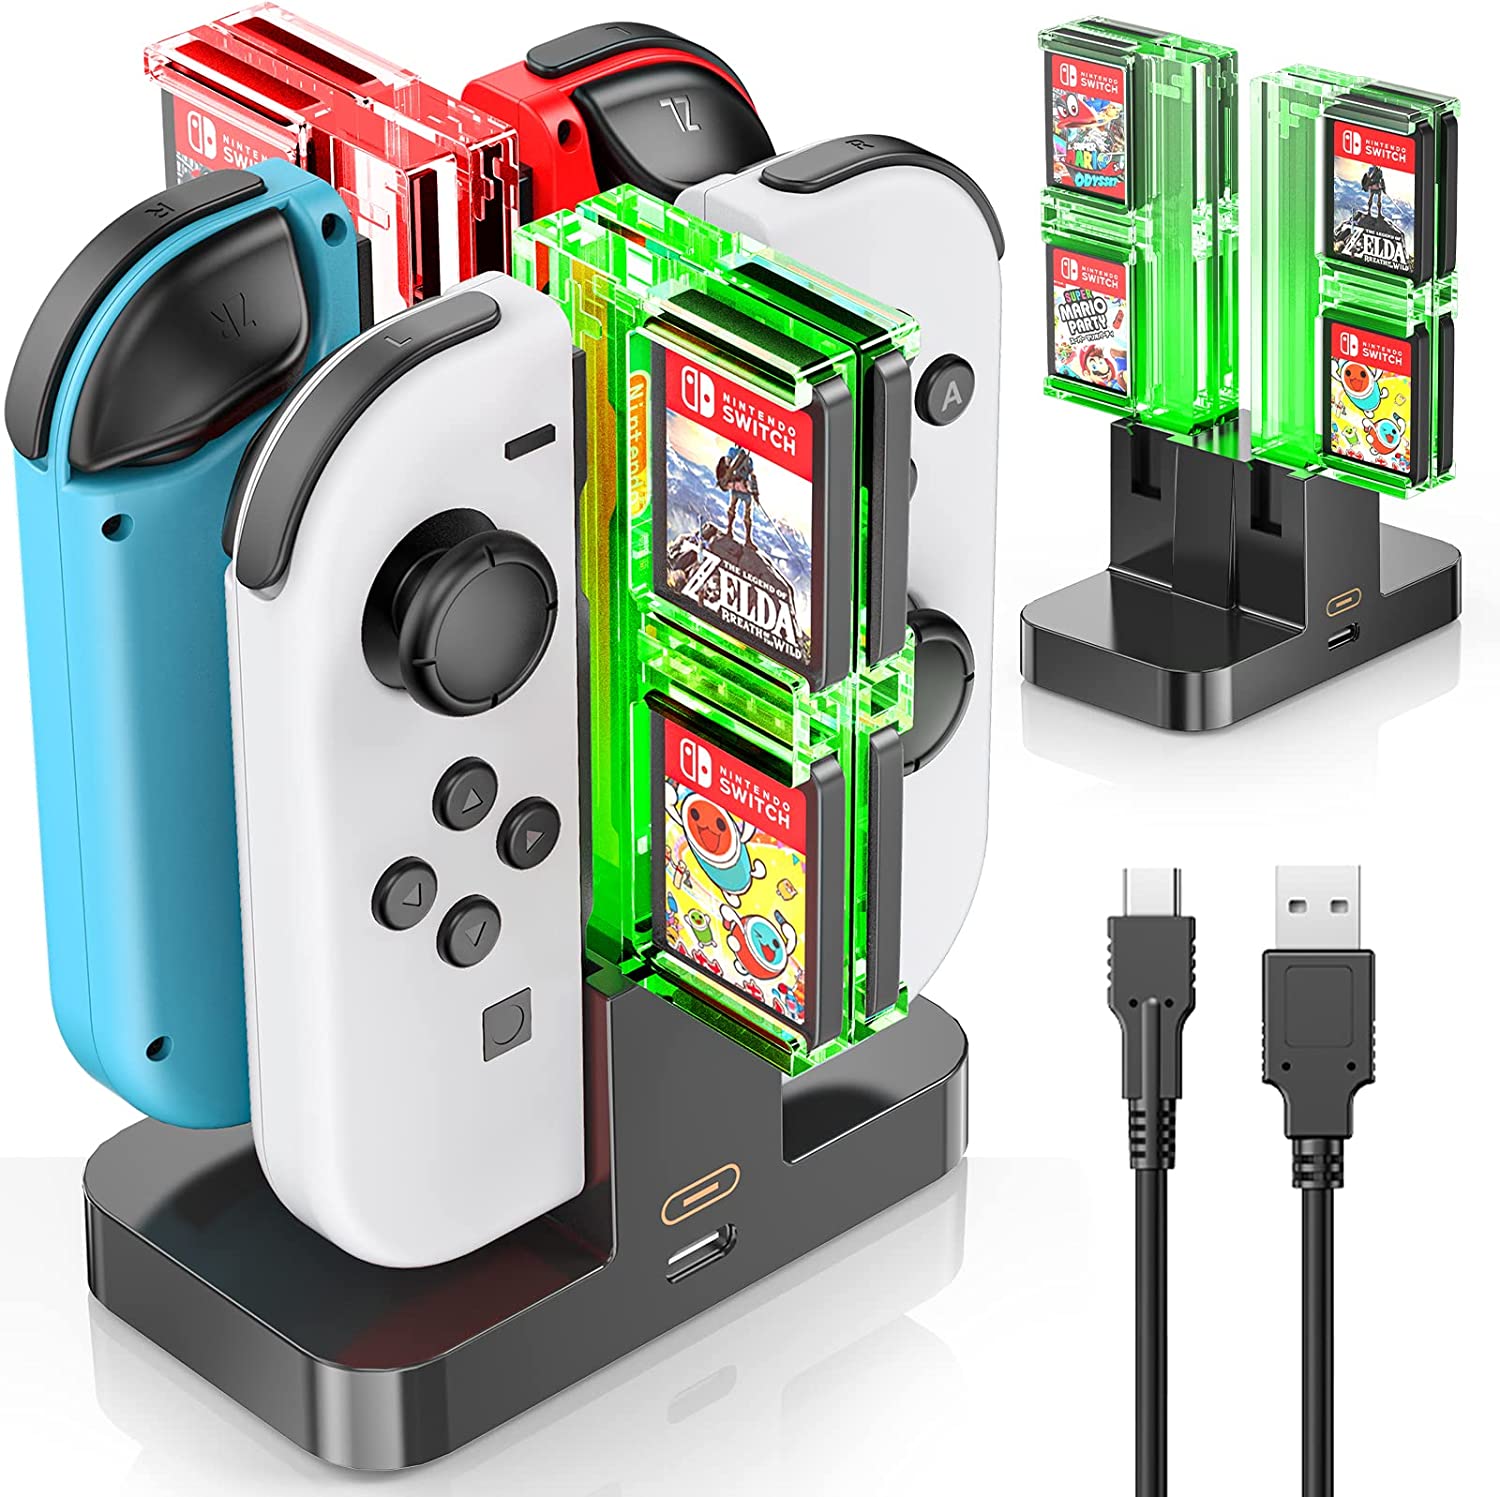 Switch Controller Charger for Joycons